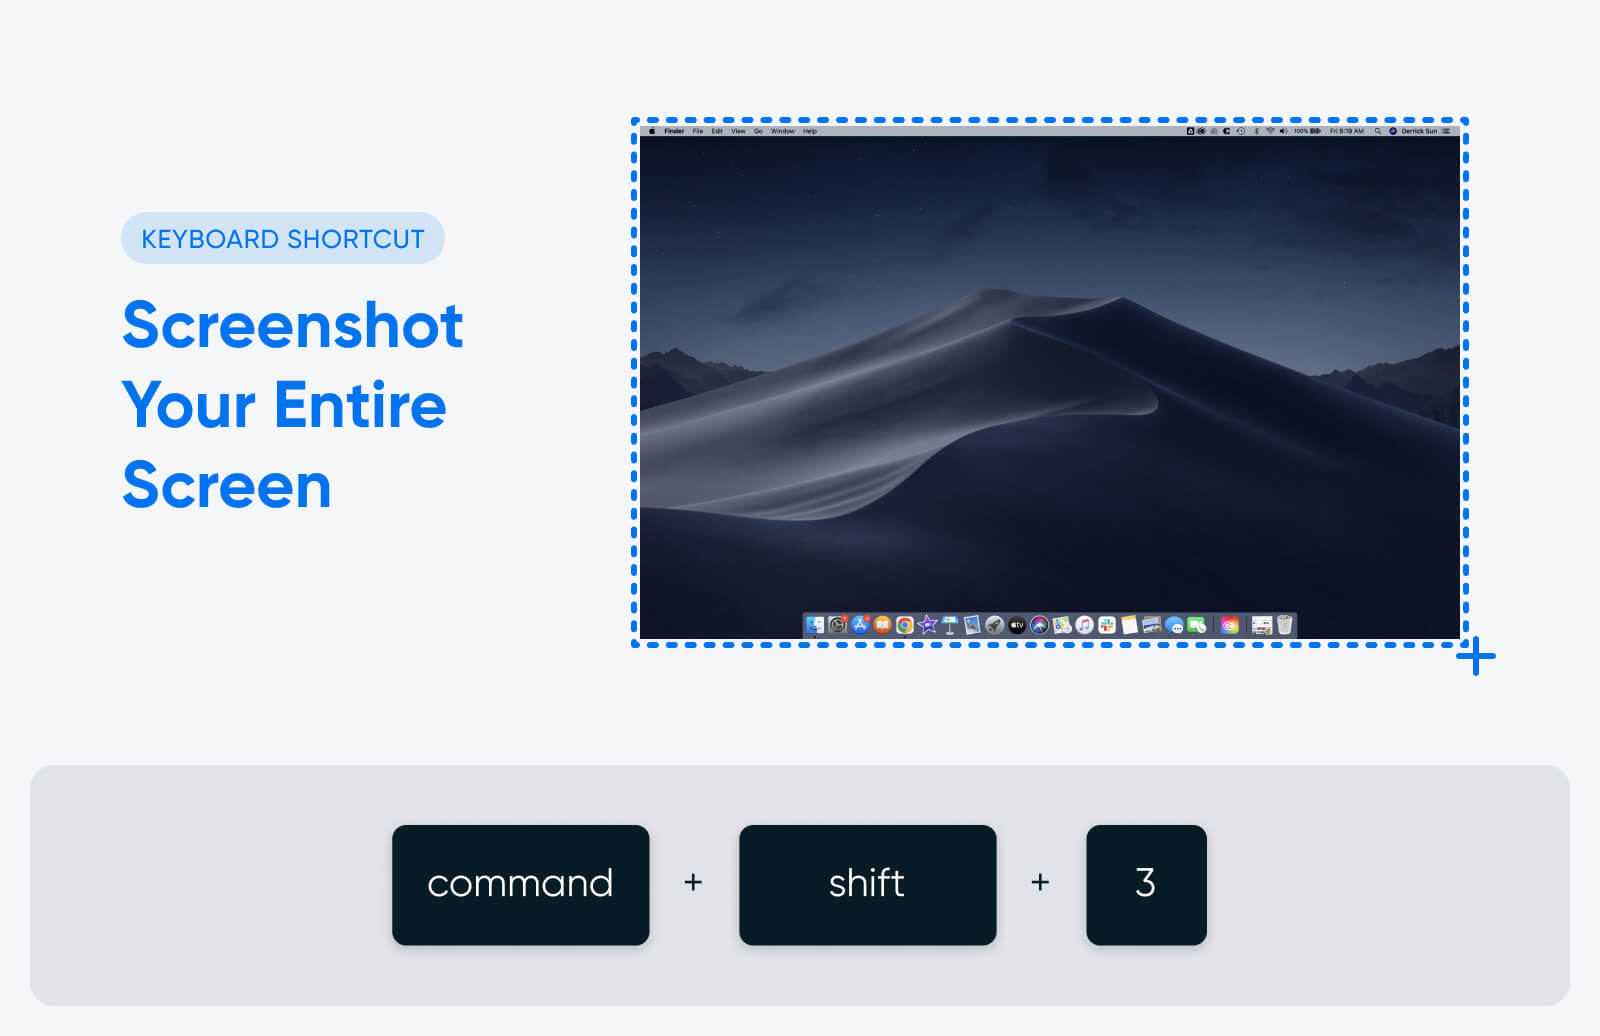 How to screenshot your entire screen on Mac